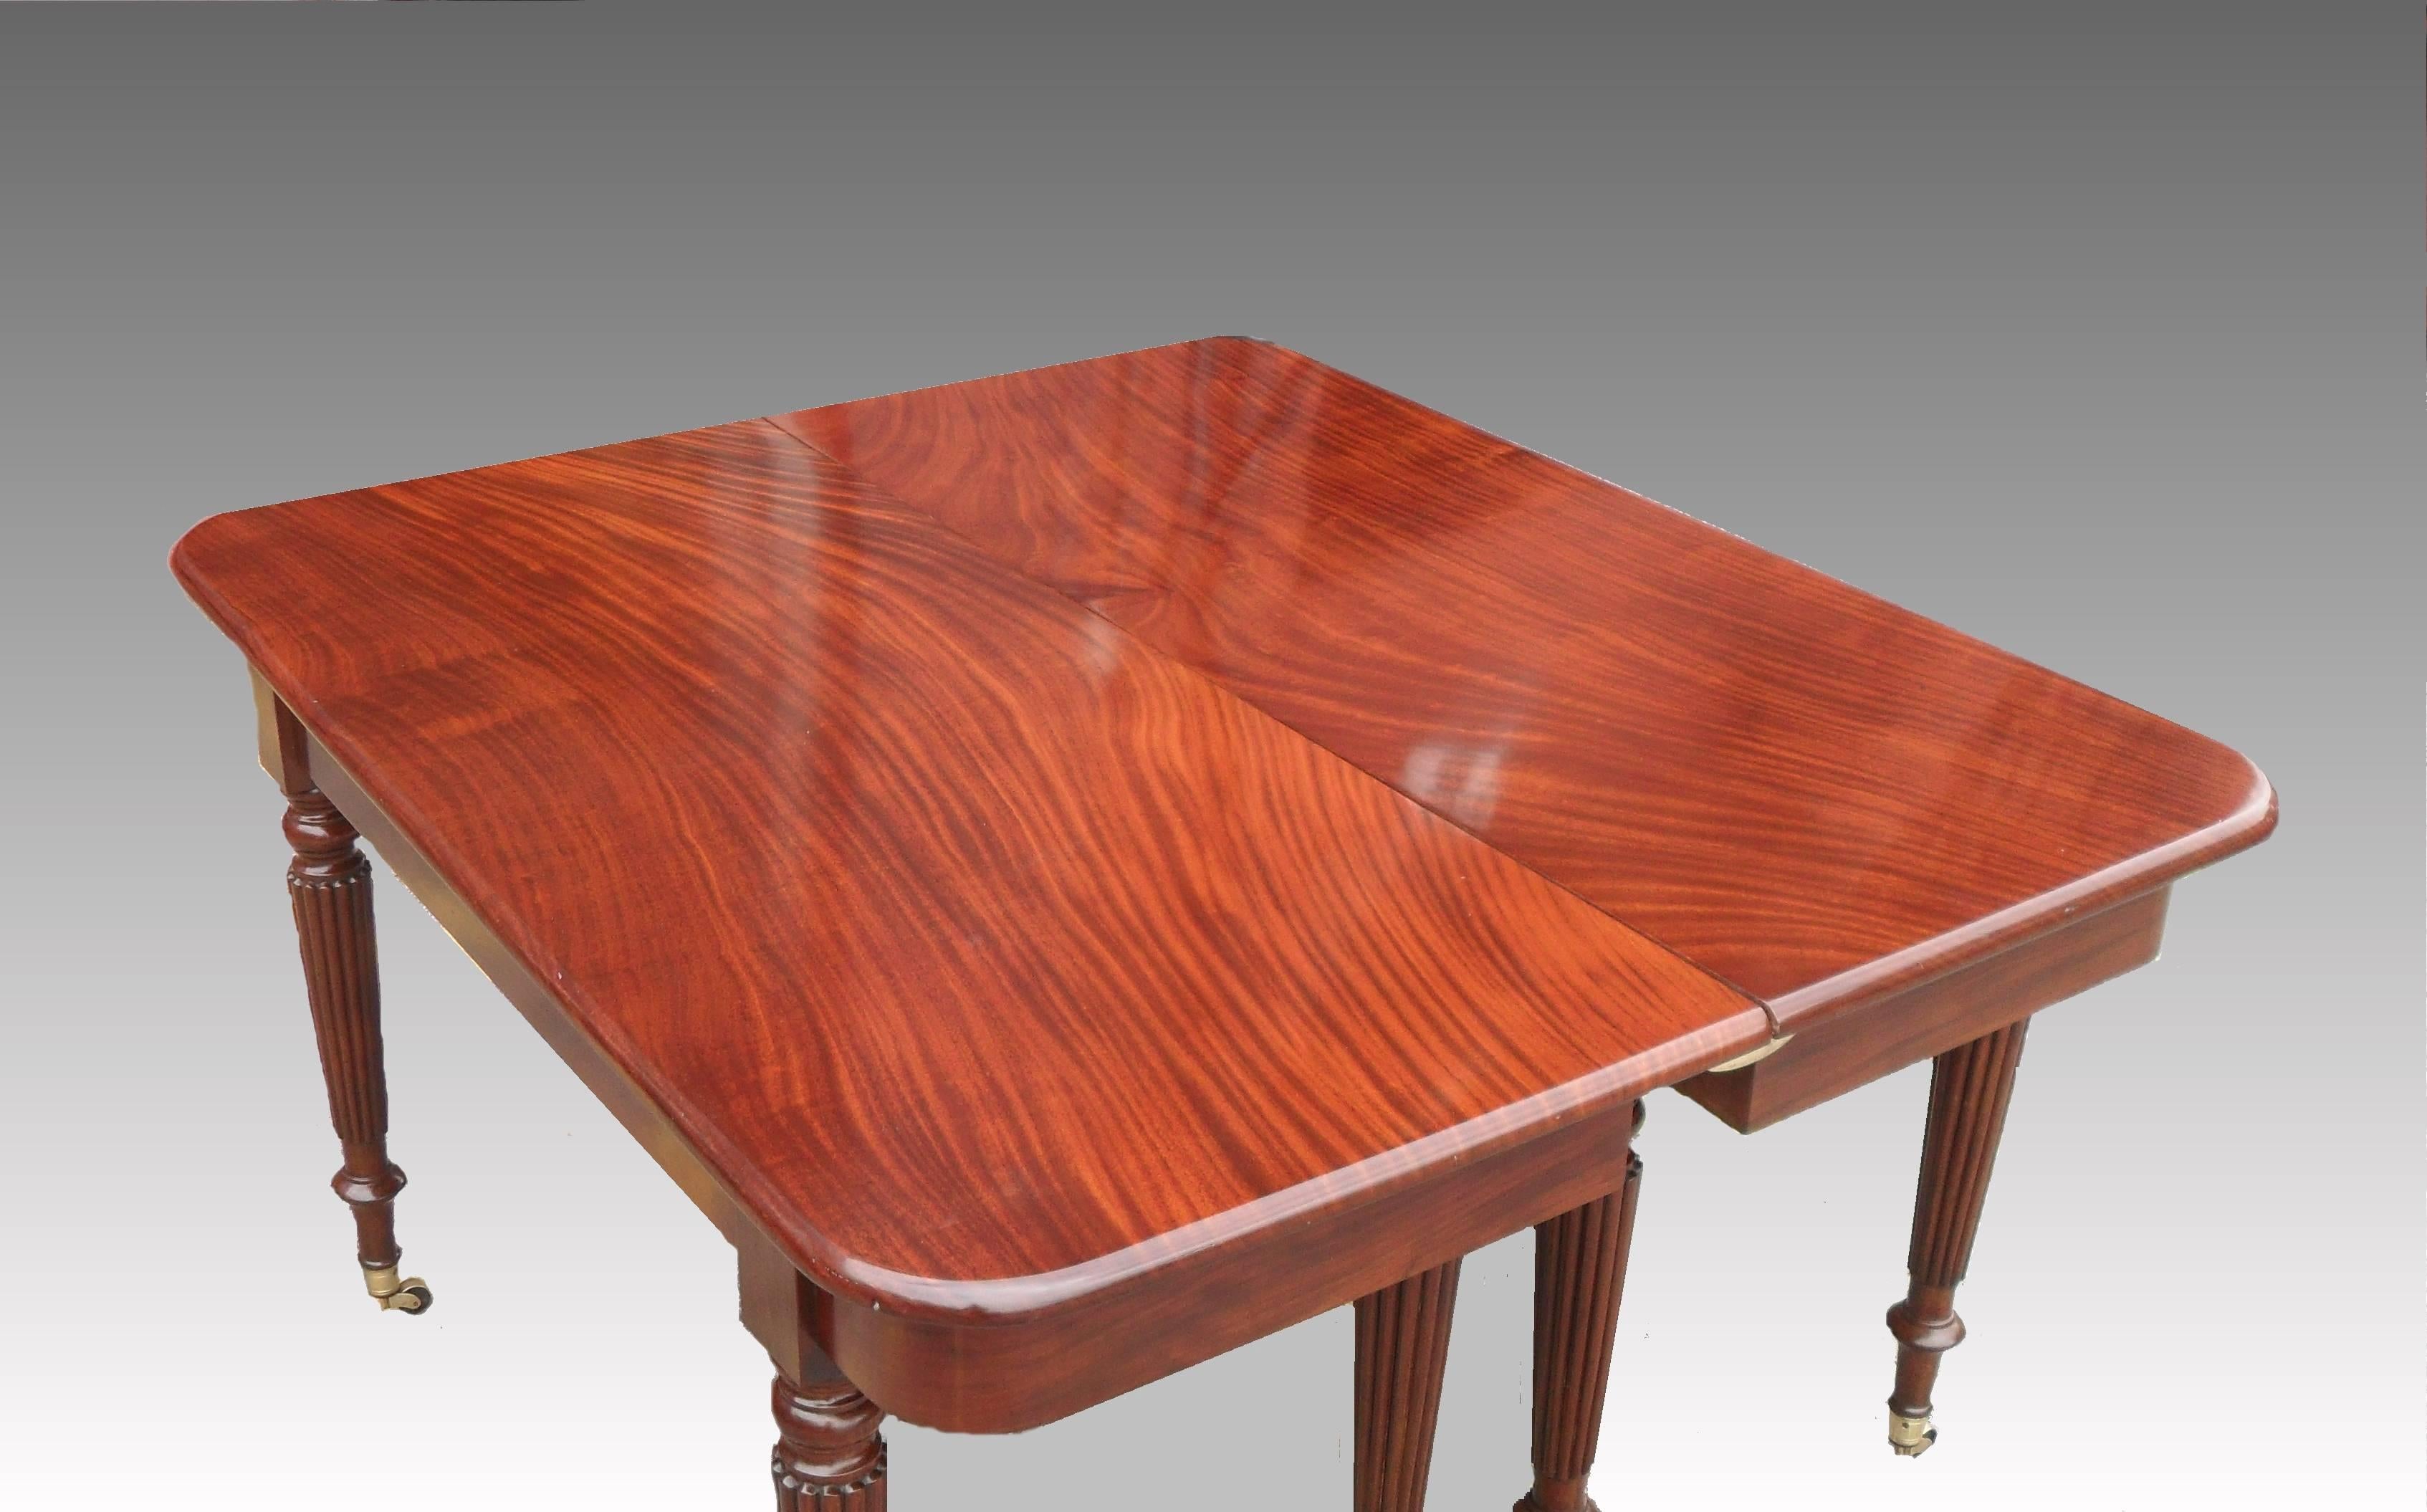 English George iv Figured Mahogany Extending Dining Table Attributed to Gillows For Sale 2